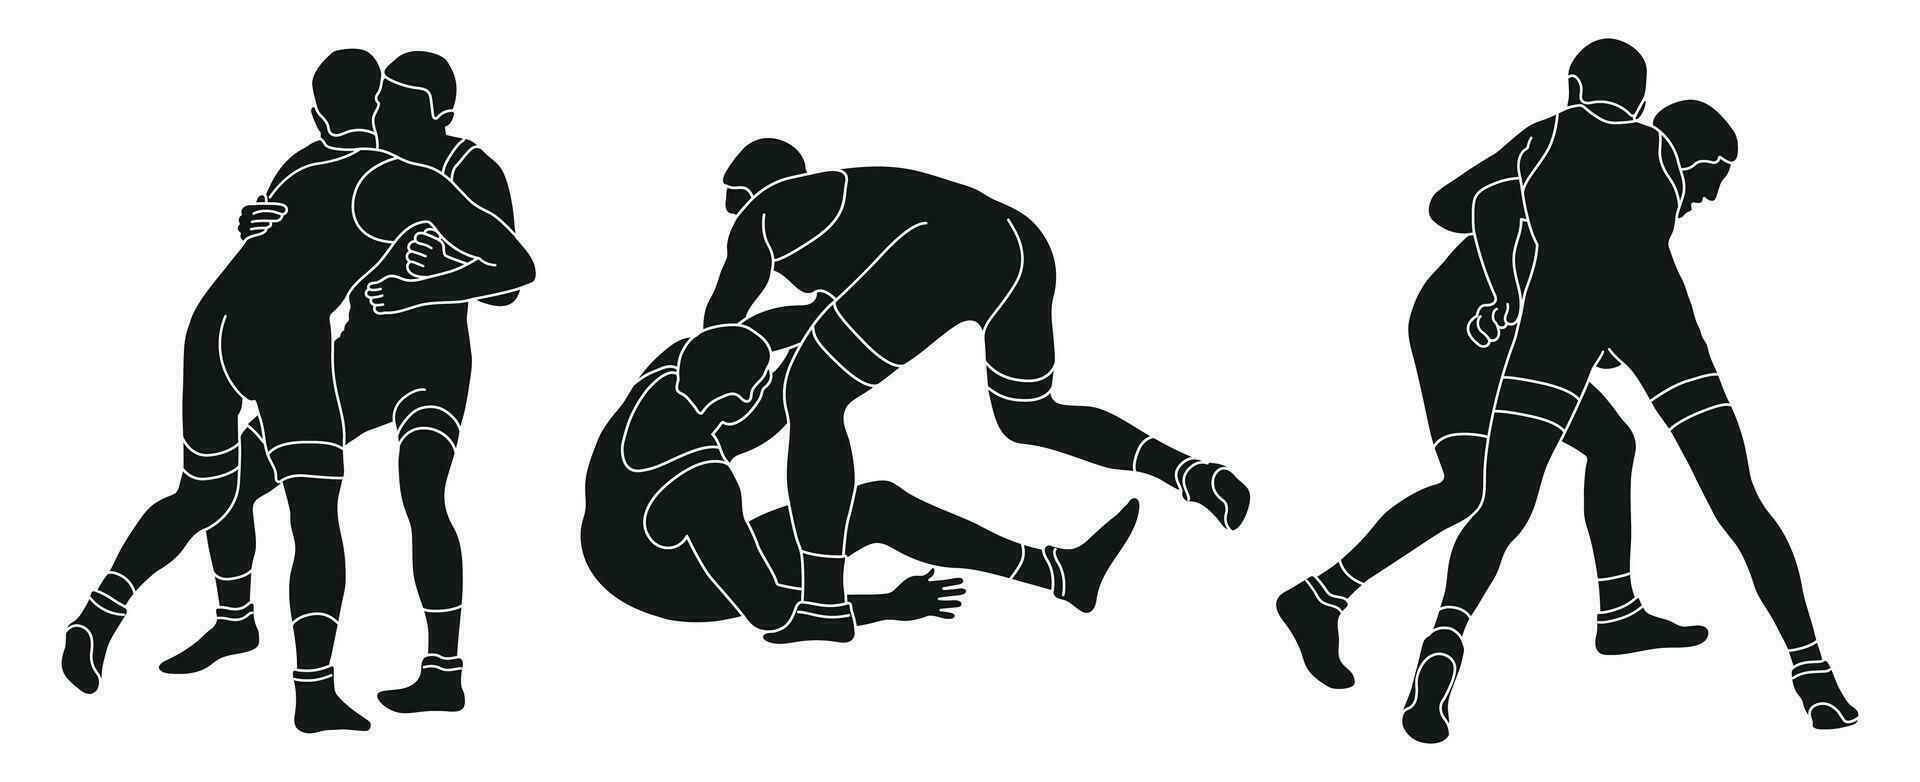 Line sketch of silhouettes athletes wrestler in wrestling, fighting. Greco Roman wrestling, fight, combating, struggle, grappling, duel, mixed martial art, sportsmanship vector